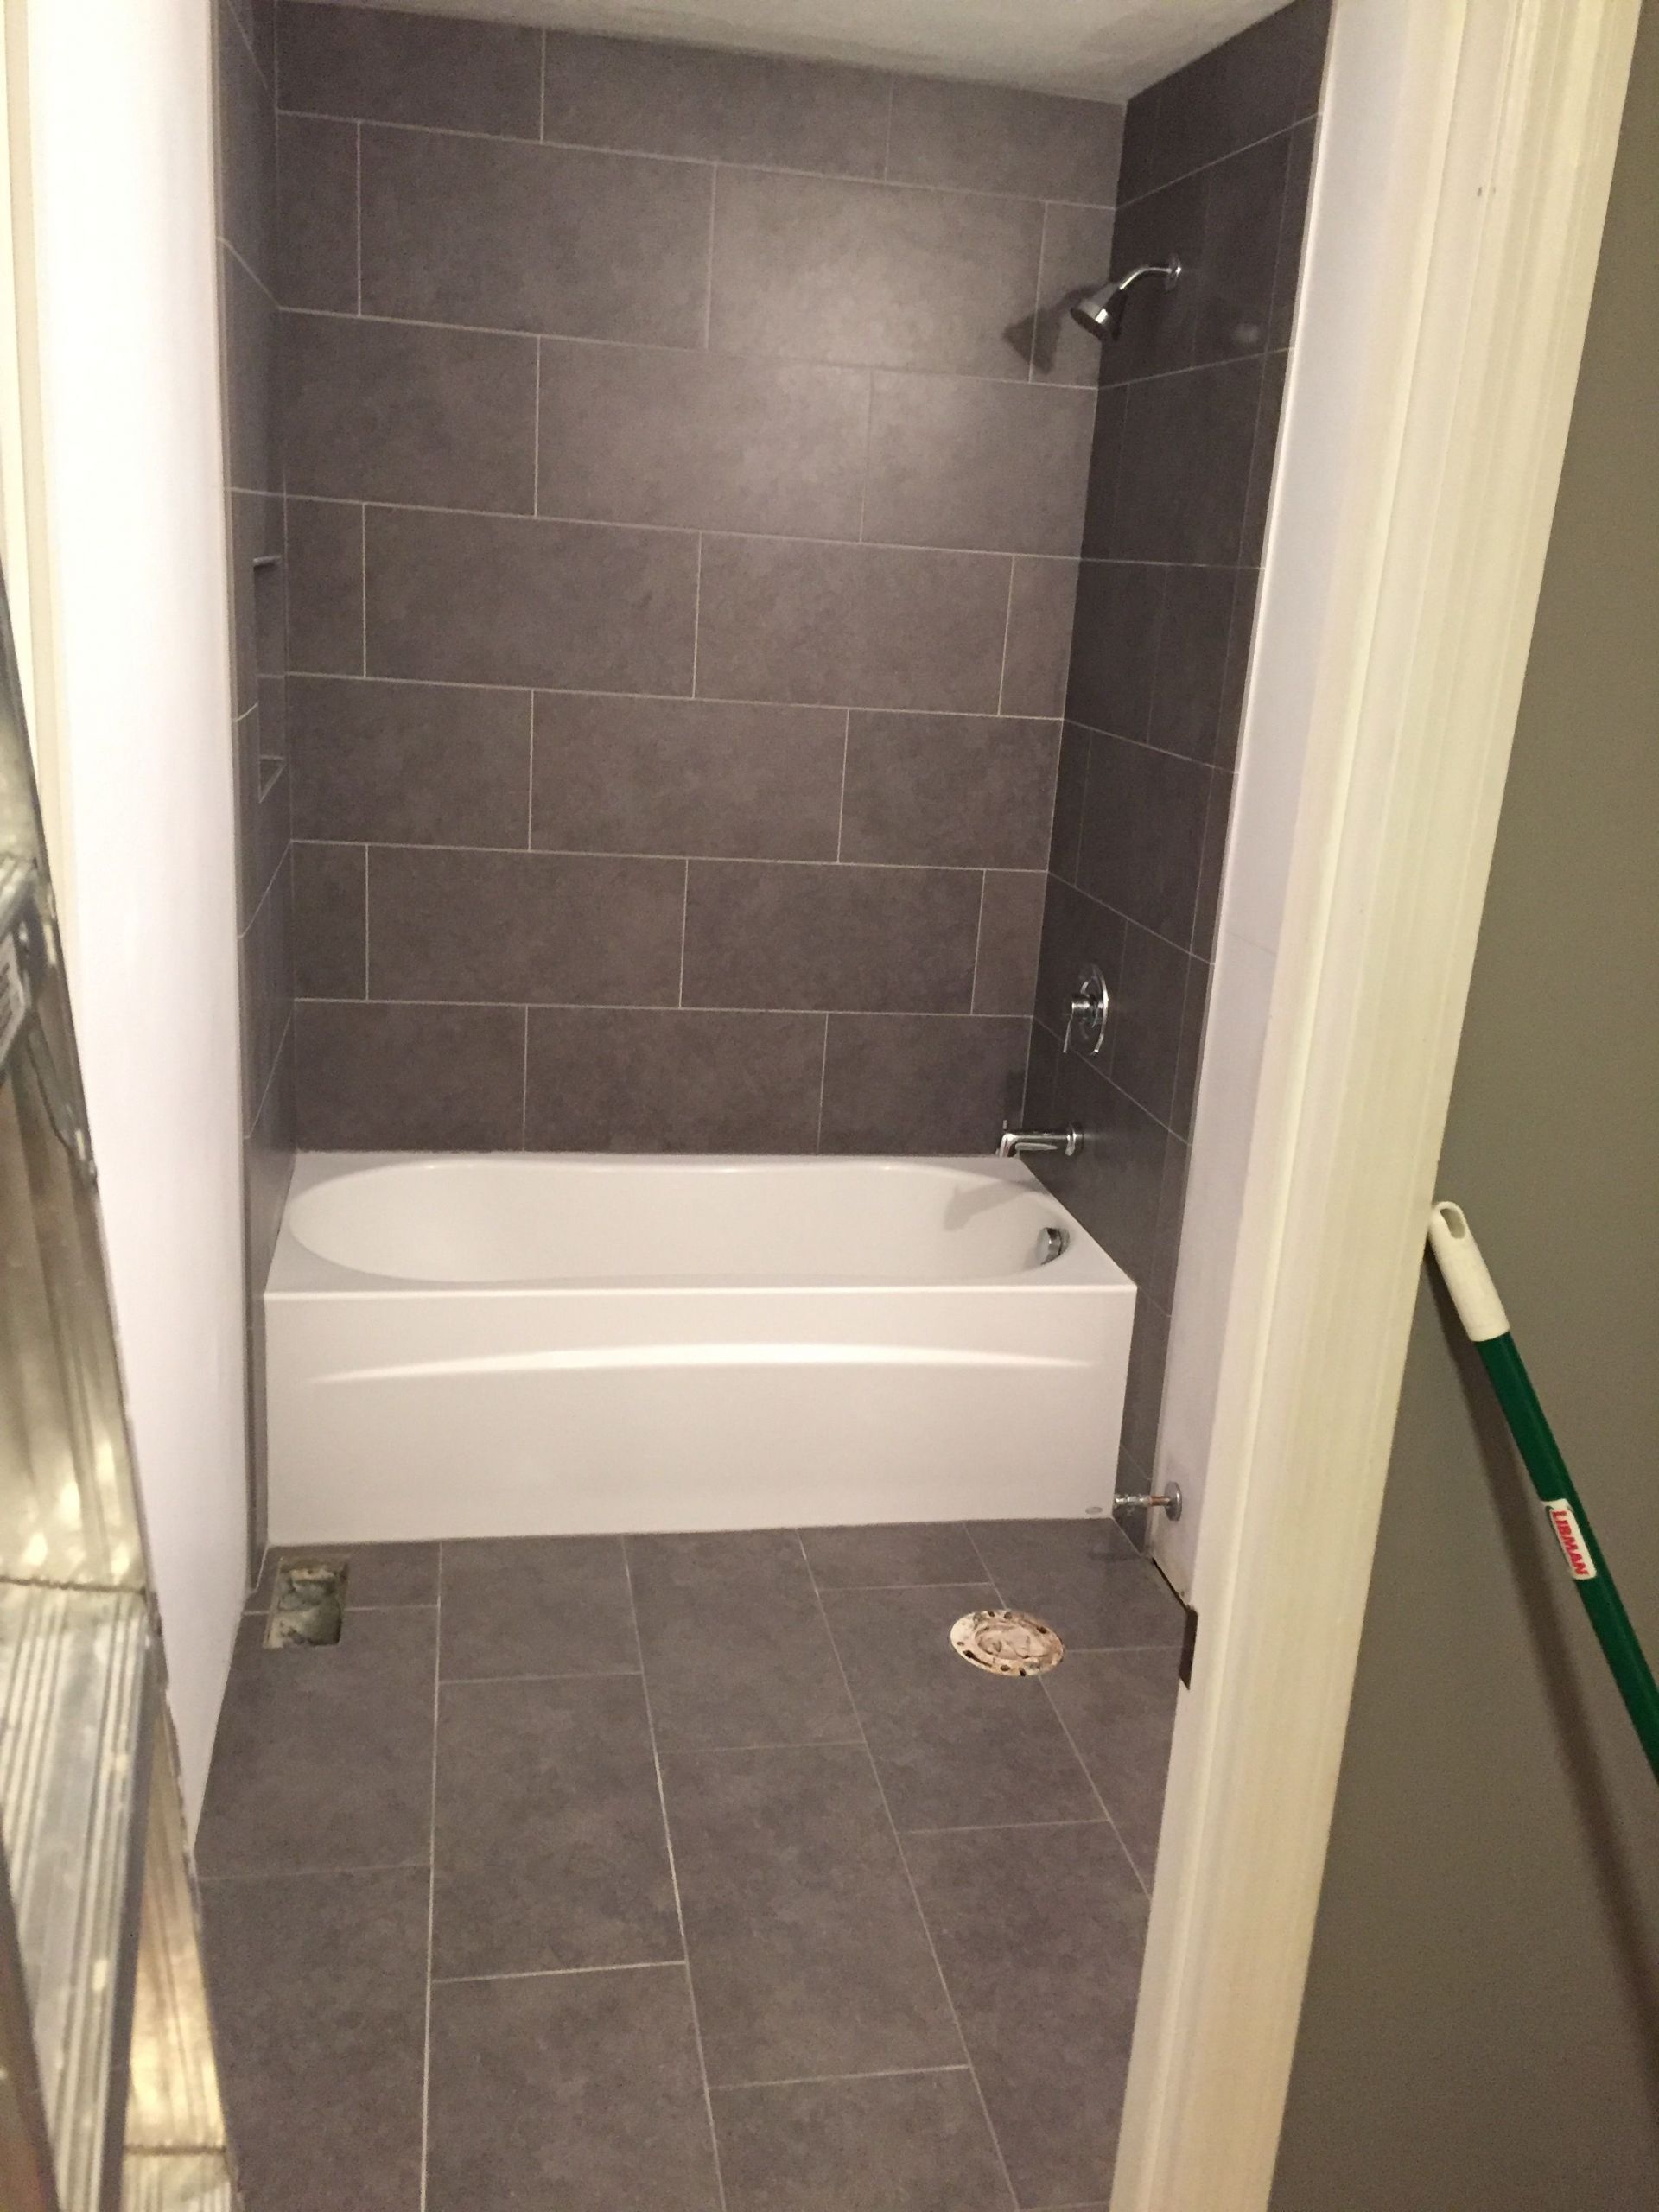 12X24 Tile In Small Bathroom
 Lowe s mitte gray tile 12x24 bathroom tub surround and